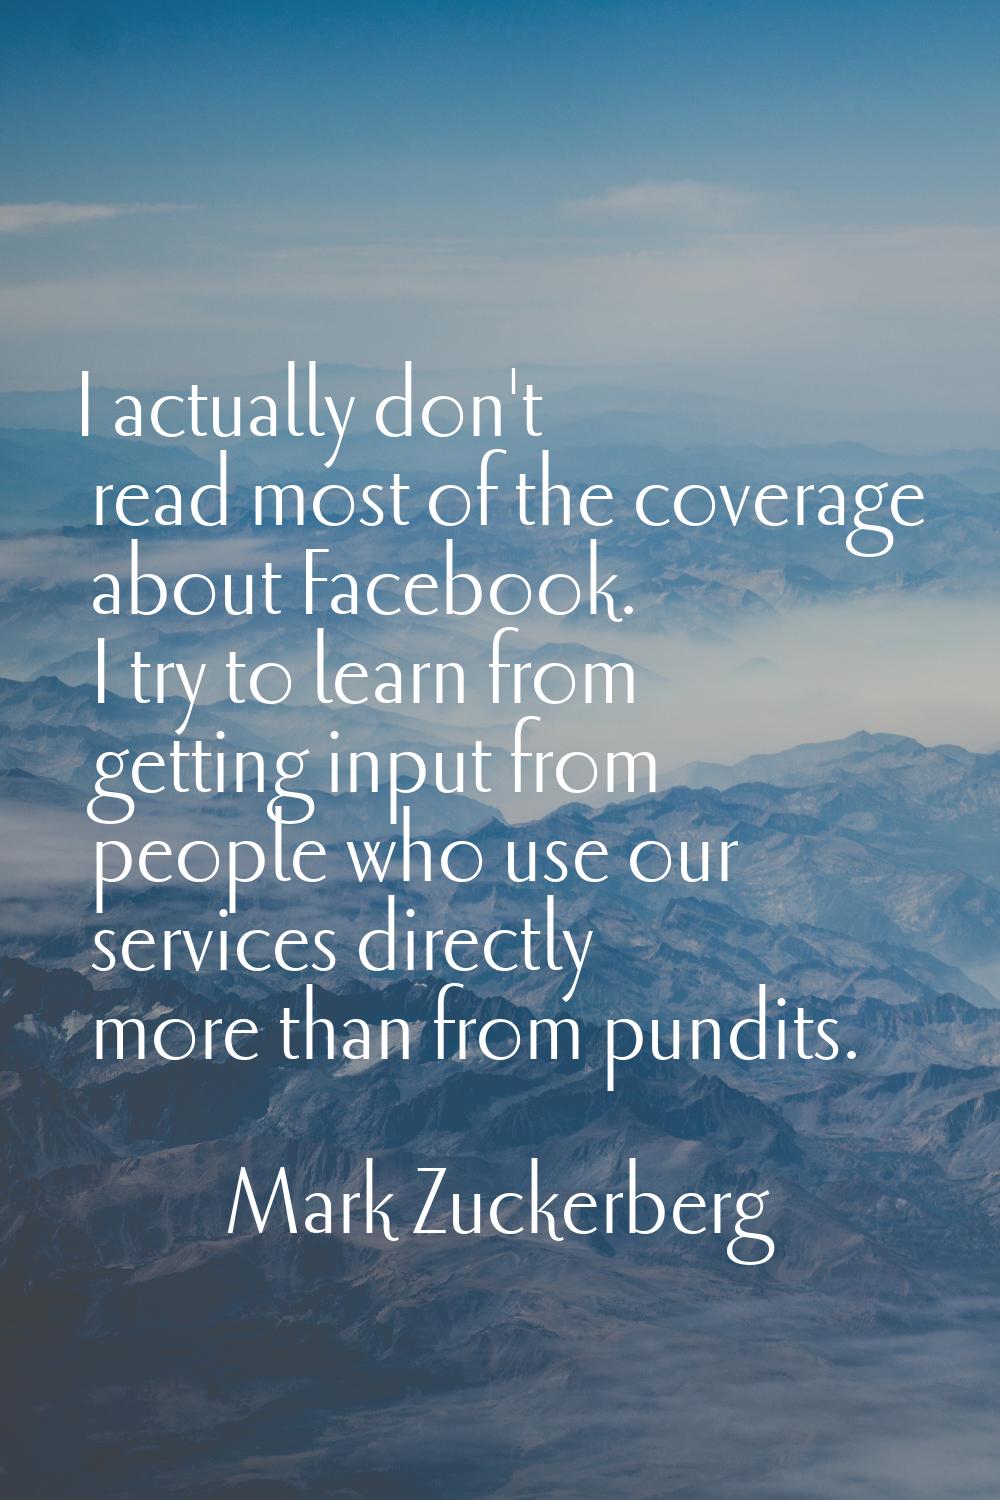 I actually don't read most of the coverage about Facebook. I try to learn from getting input from p